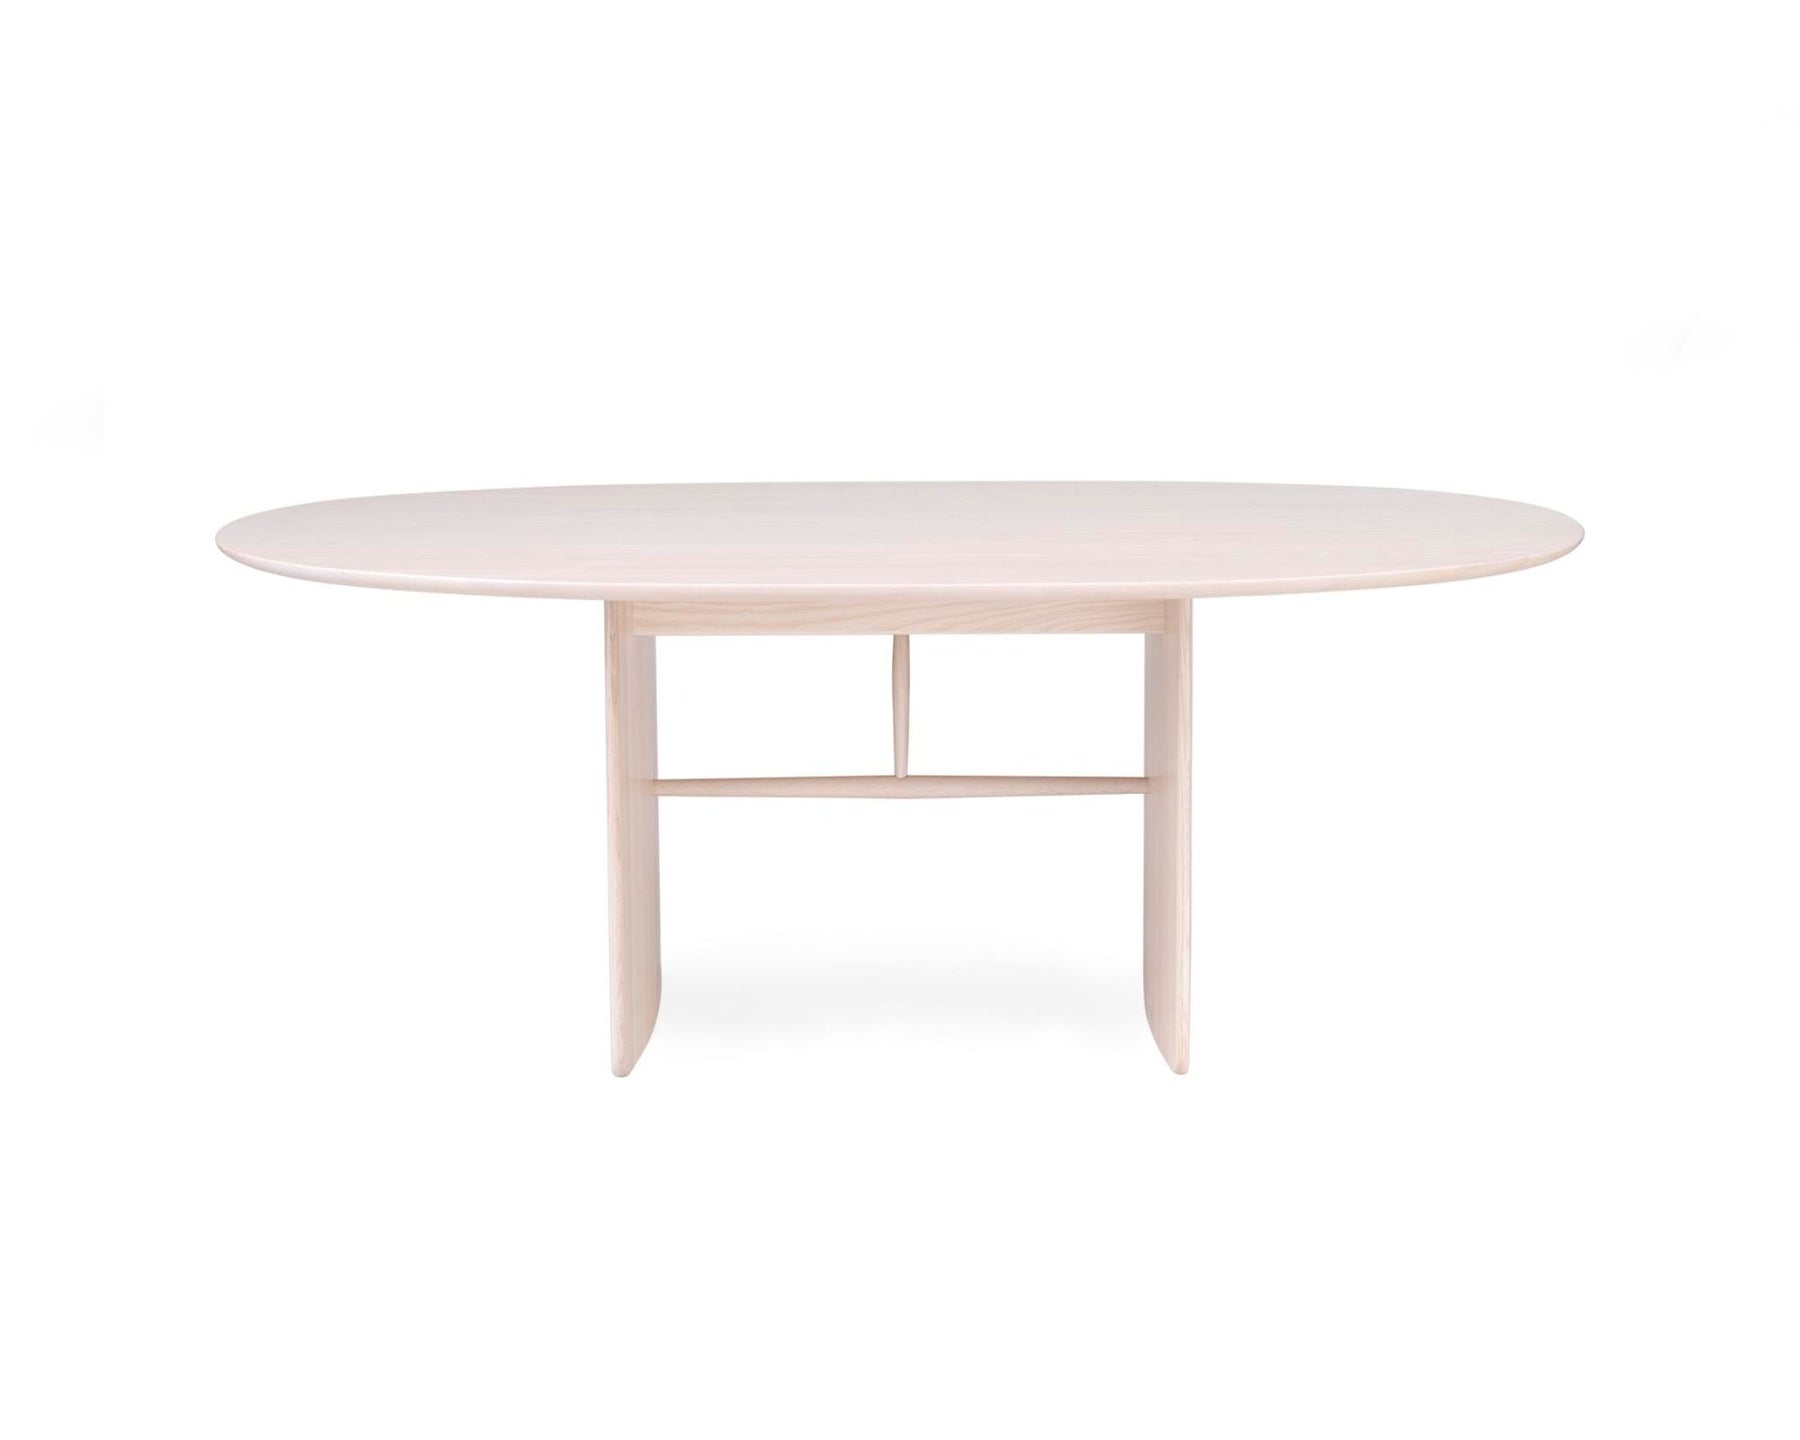 Pennon Small Table | DSHOP